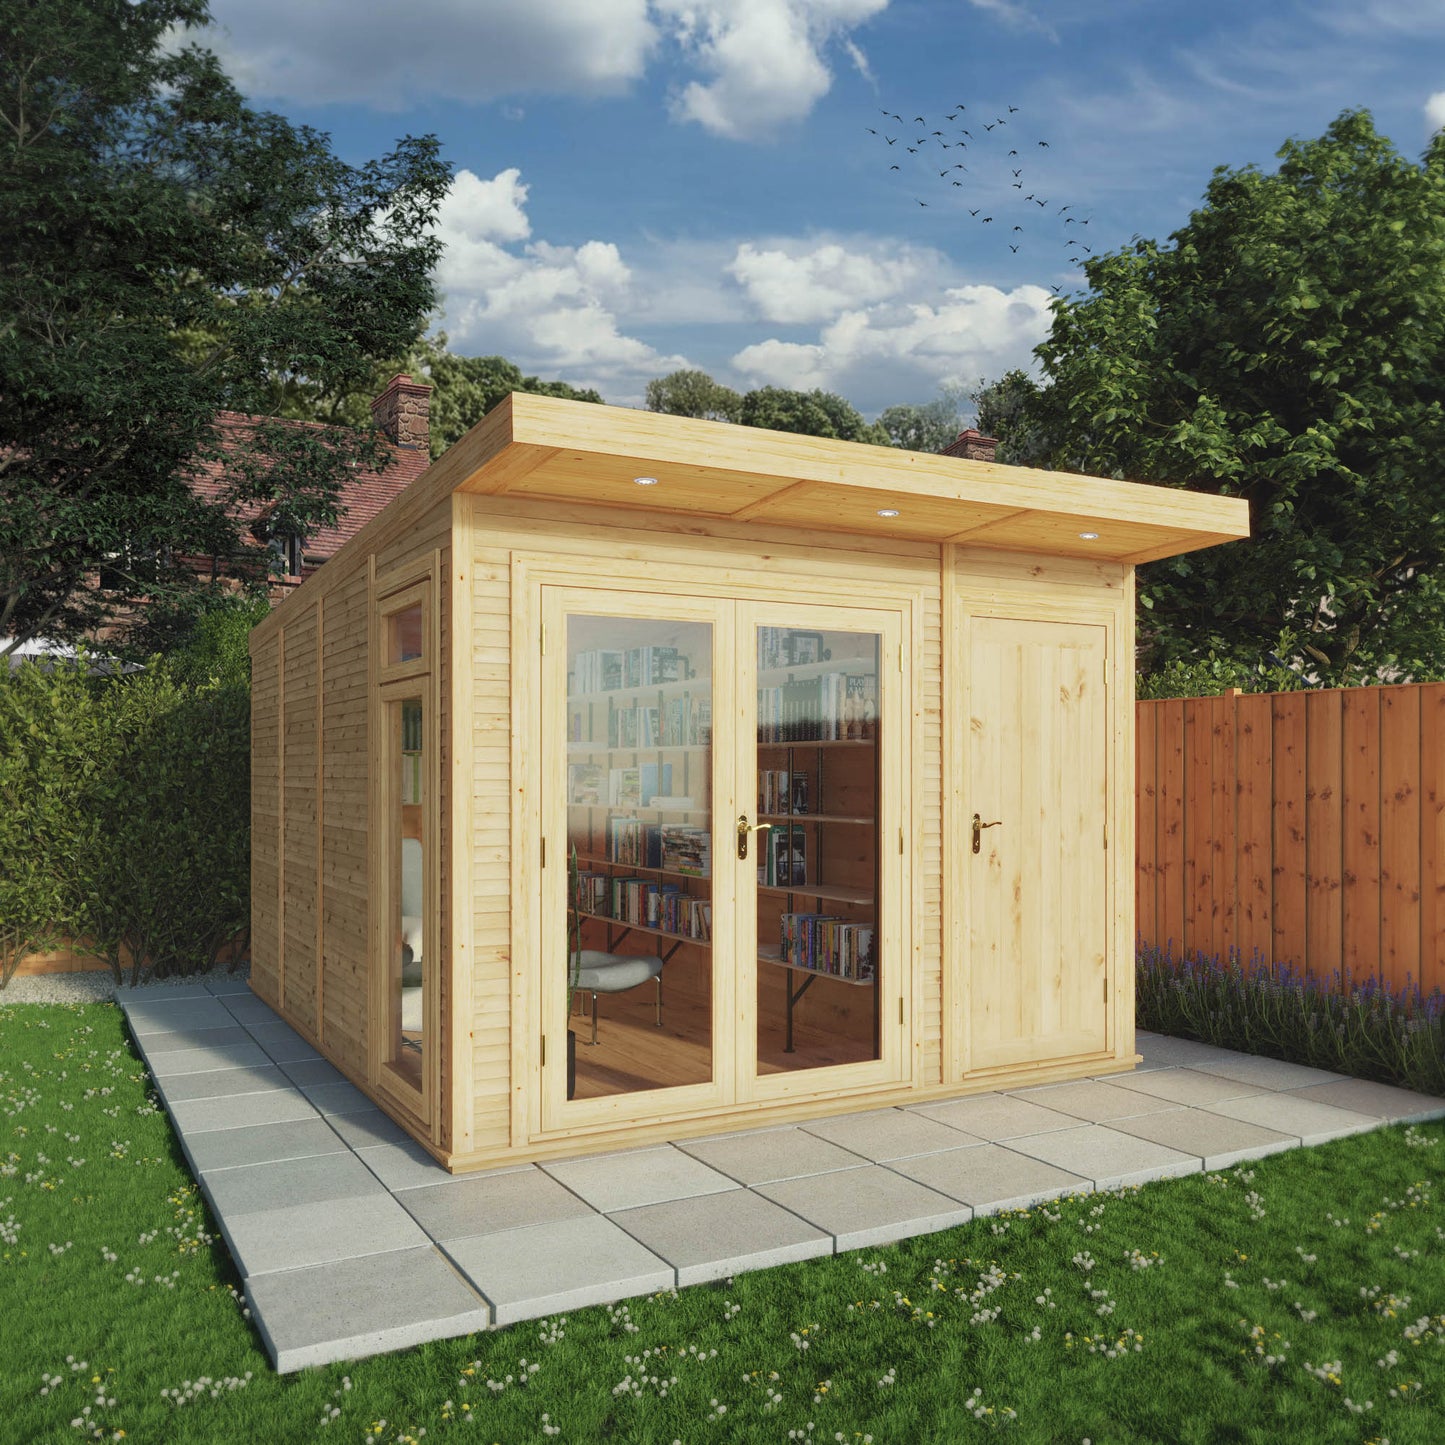 3 x 4m Insulated Garden Room with Side Shed